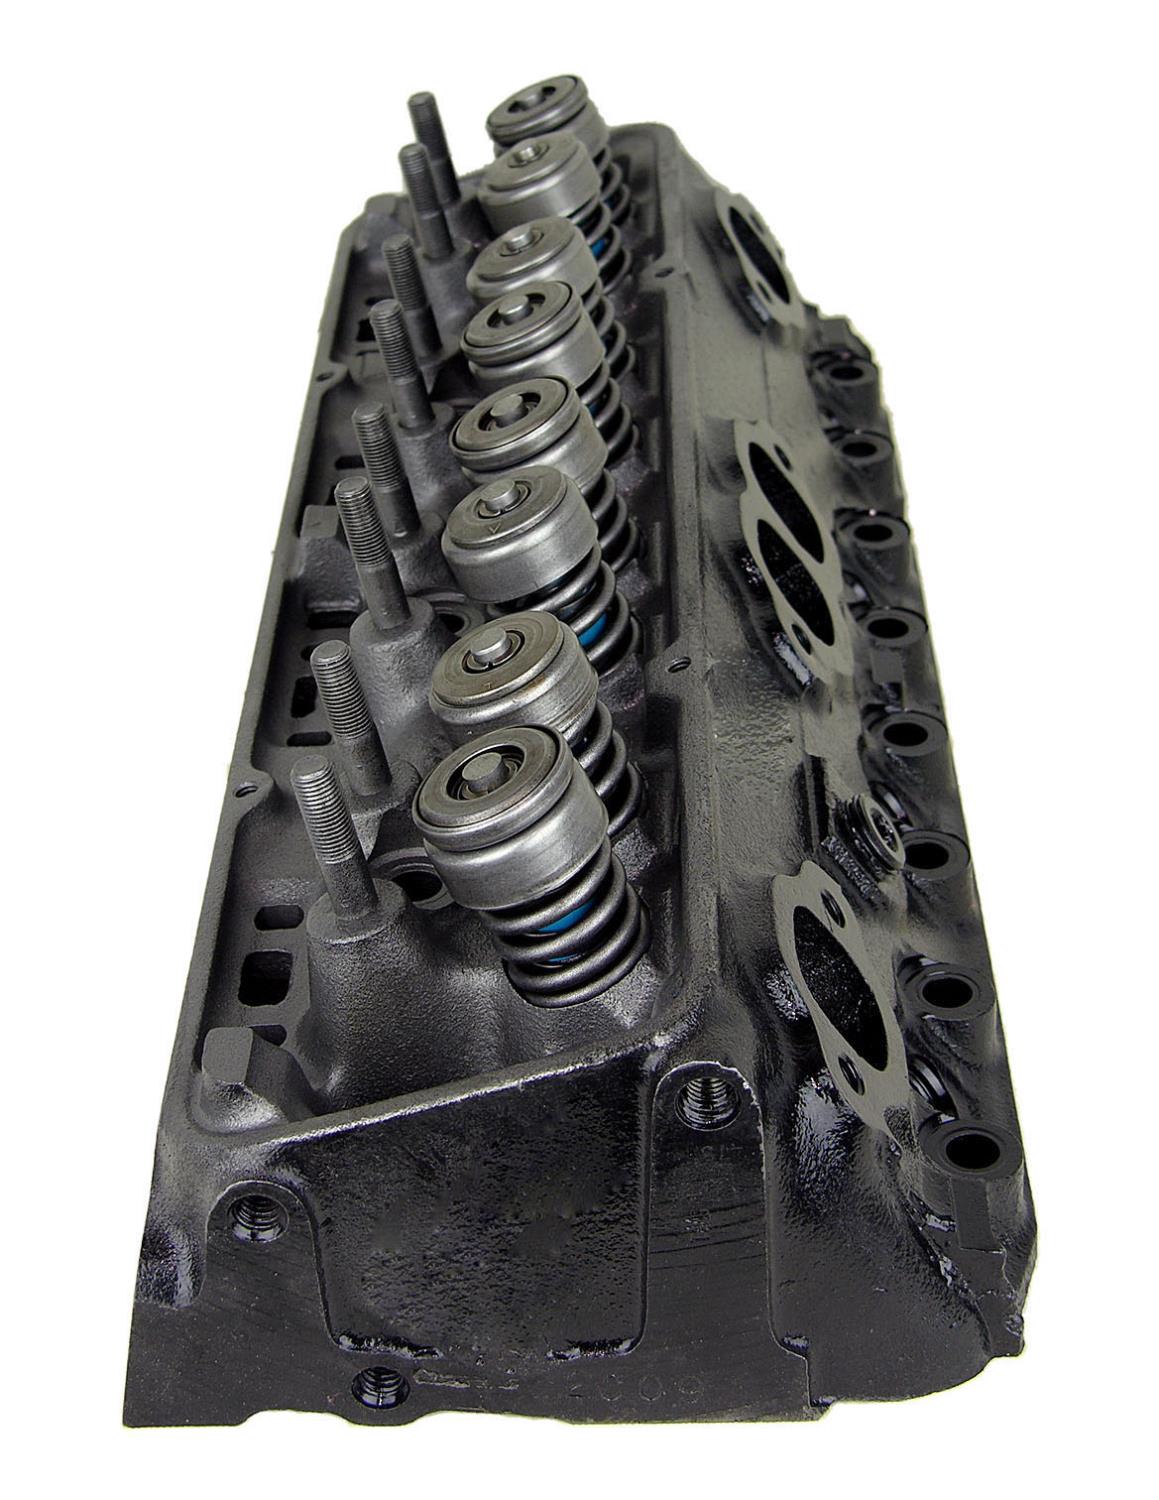 2C09 Remanufactured Cylinder Head for 1967-1986 Chevy/GMC/Buick/Olds/Pontiac with 350ci/5.7L V8